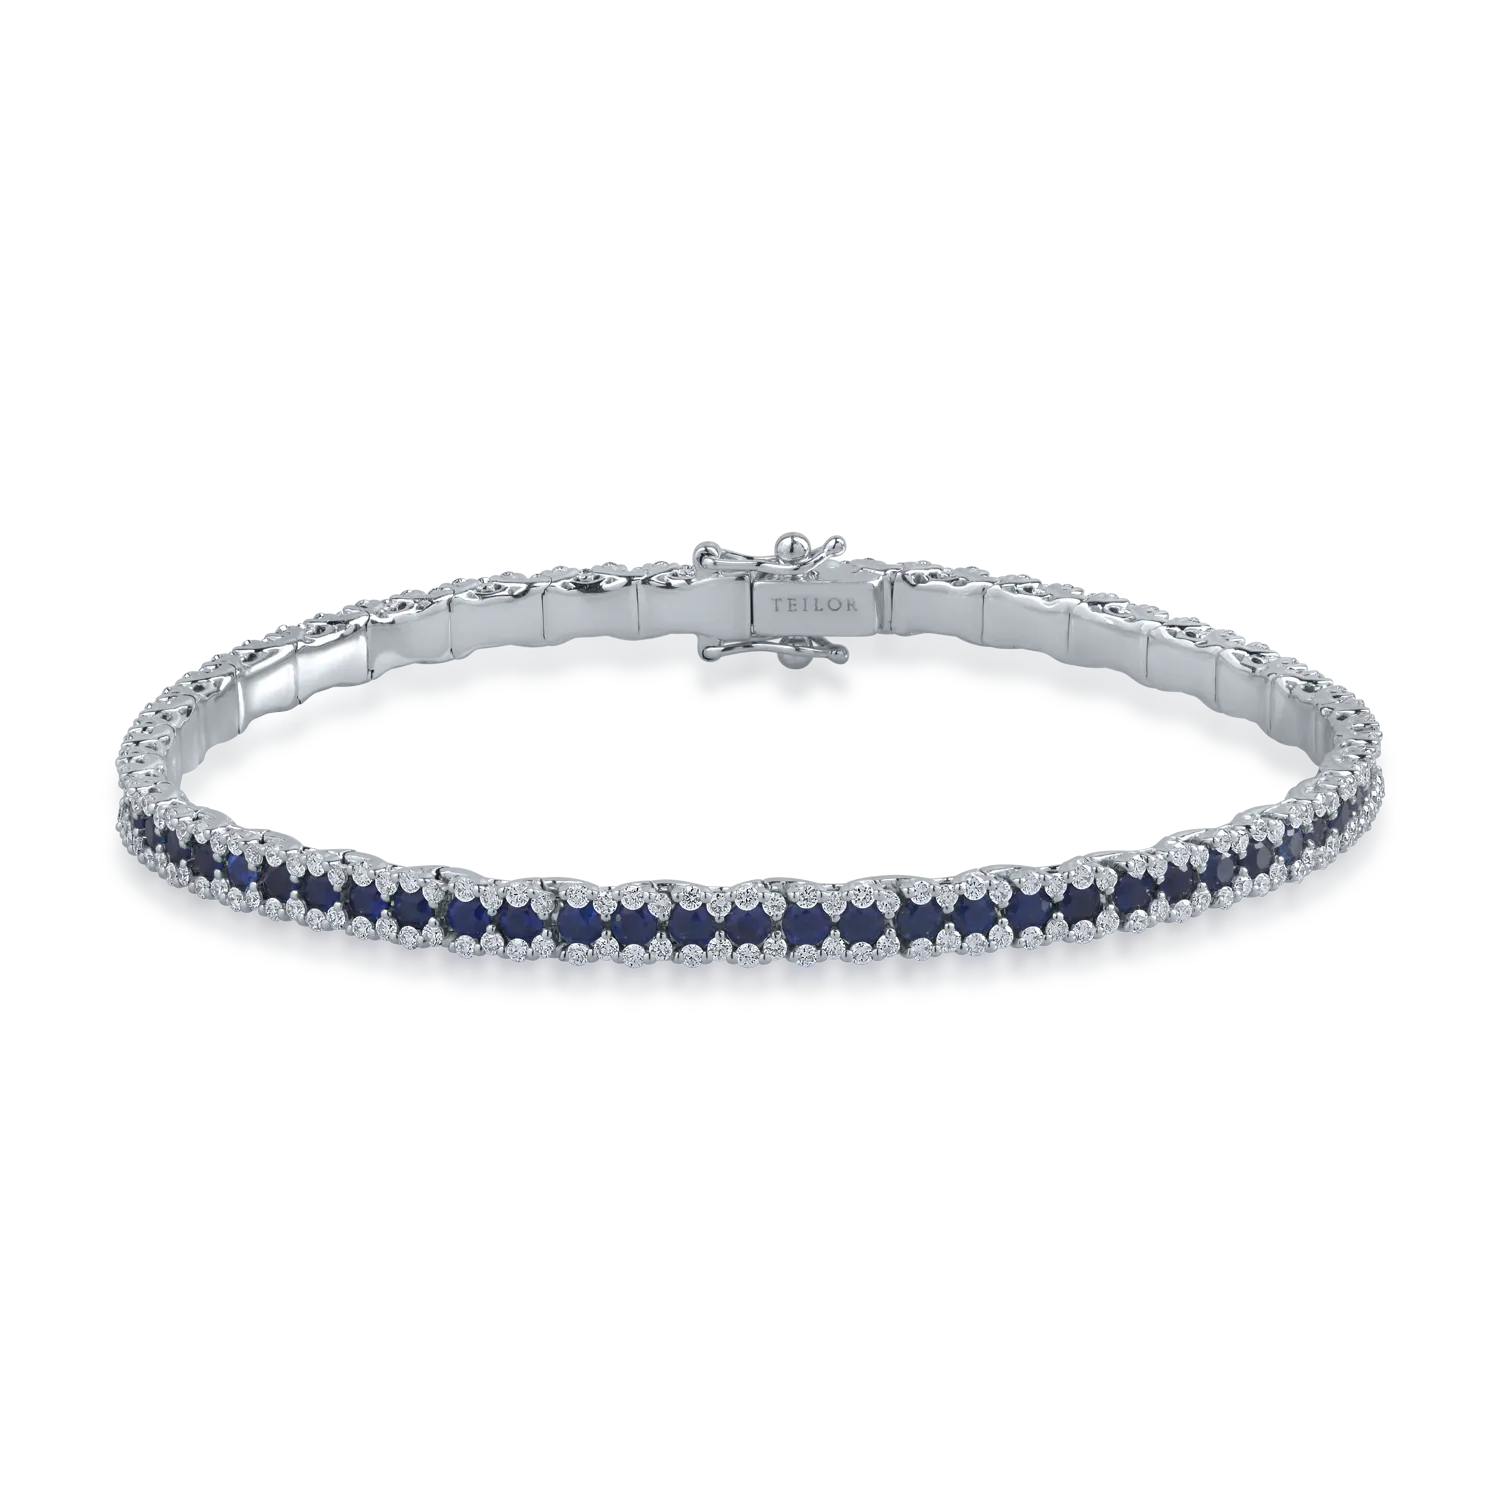 White gold tennis bracelet with 3.67ct sapphires and 1.61ct diamonds